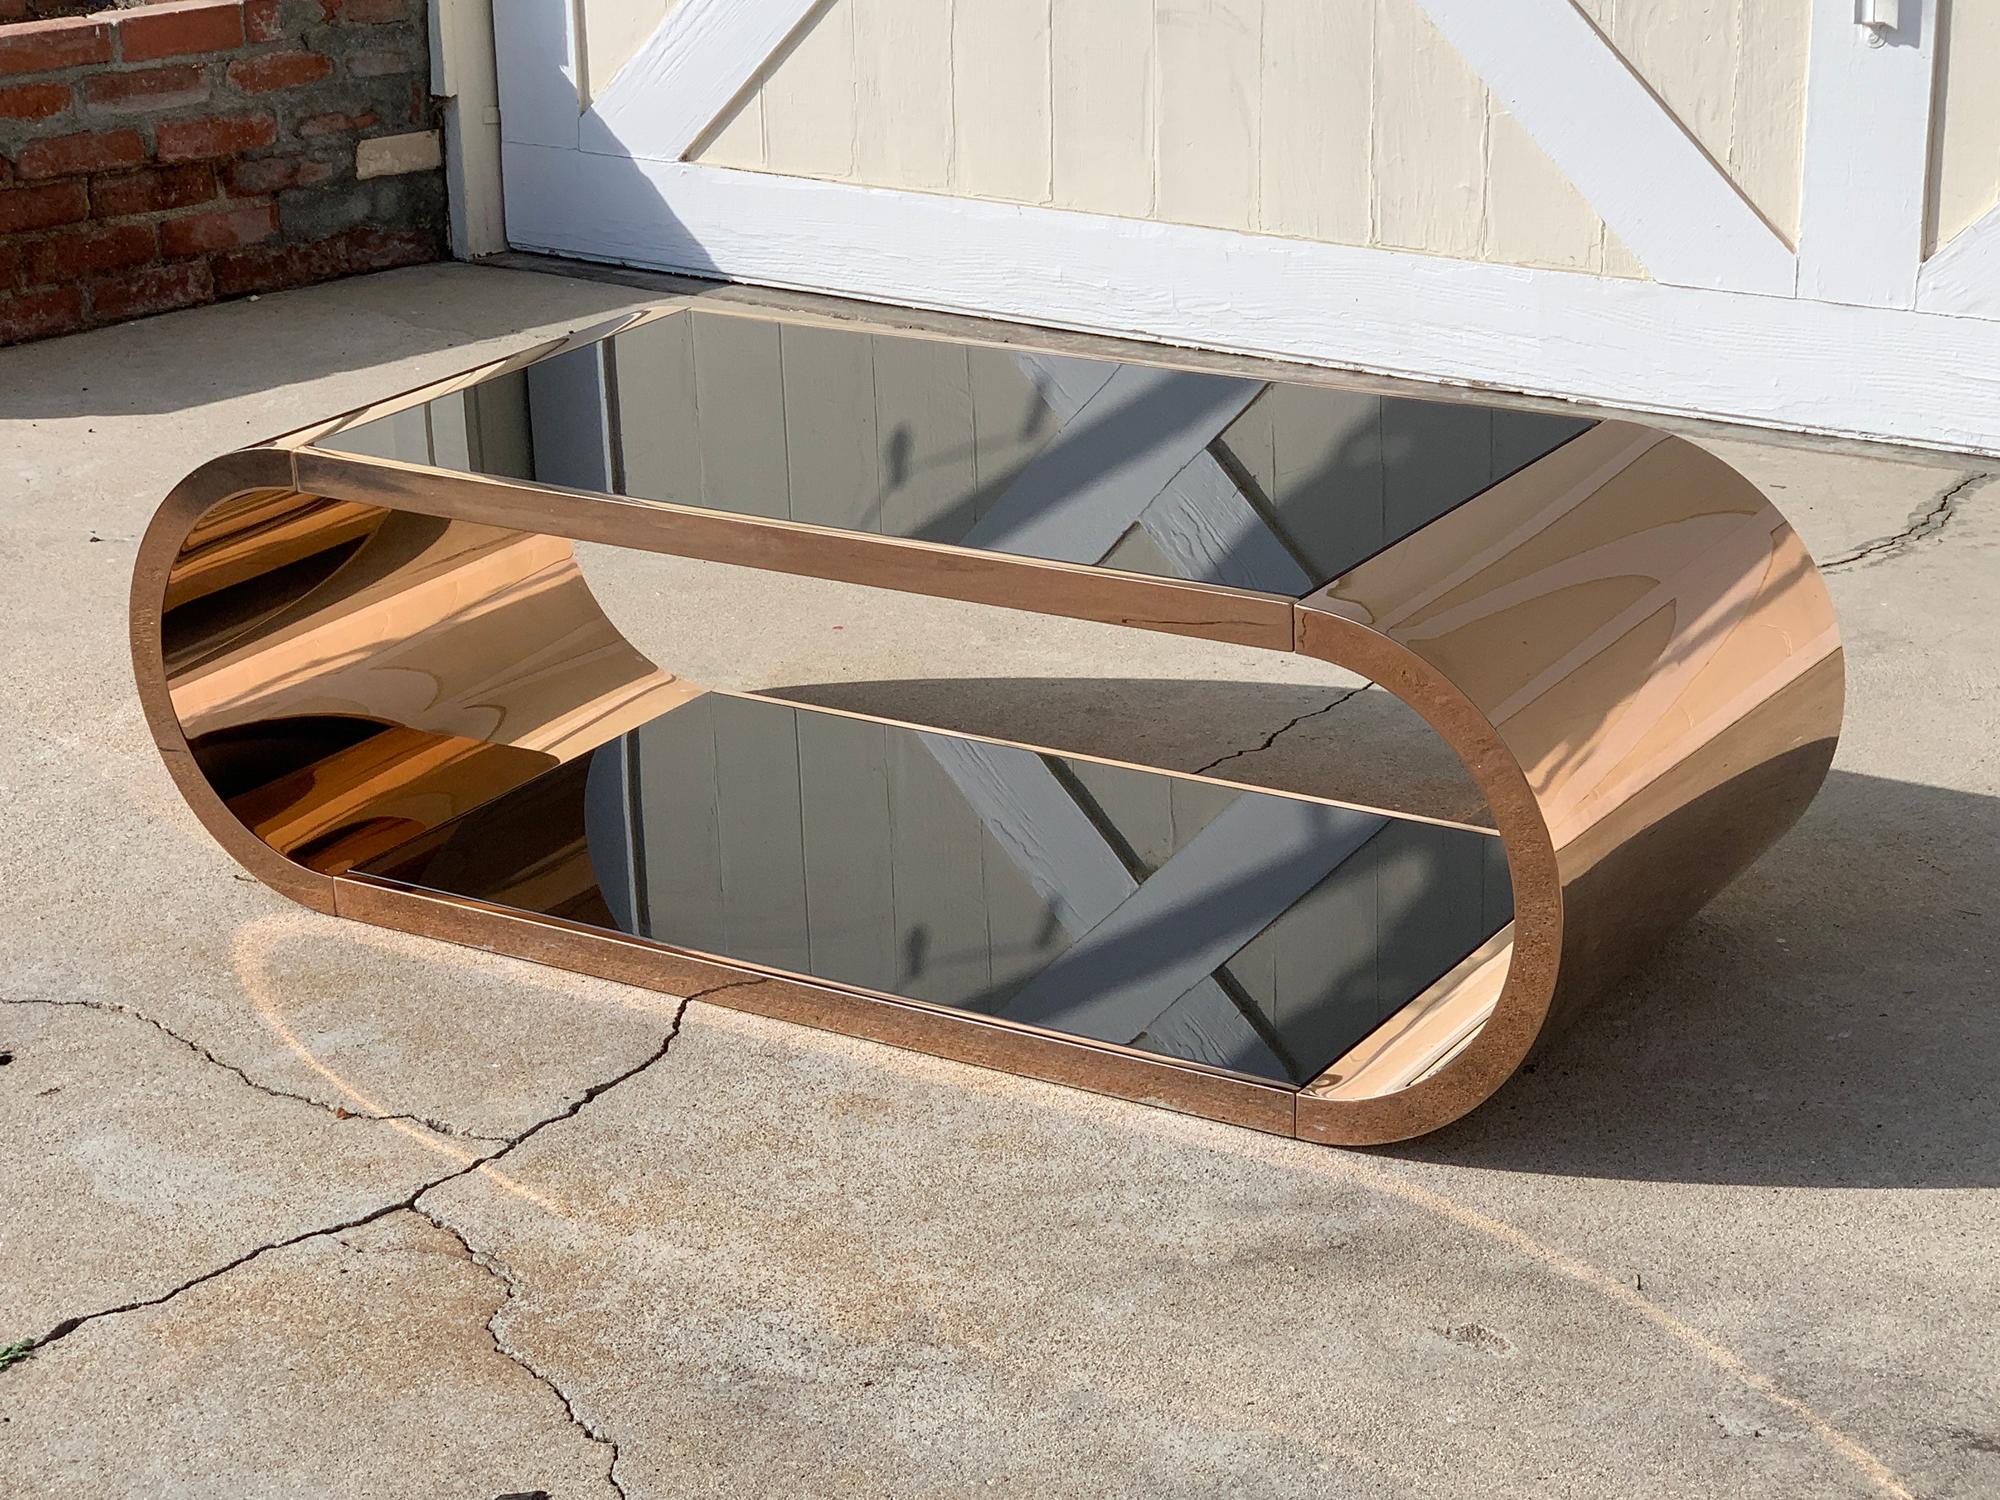 Stunningly beautiful coffee table made in metal and copper plated (we can have it replated in your choice of metal for an additional fee and 3 weeks lead time).
The table has a bottom and top shelves that are black (the glass has a film under